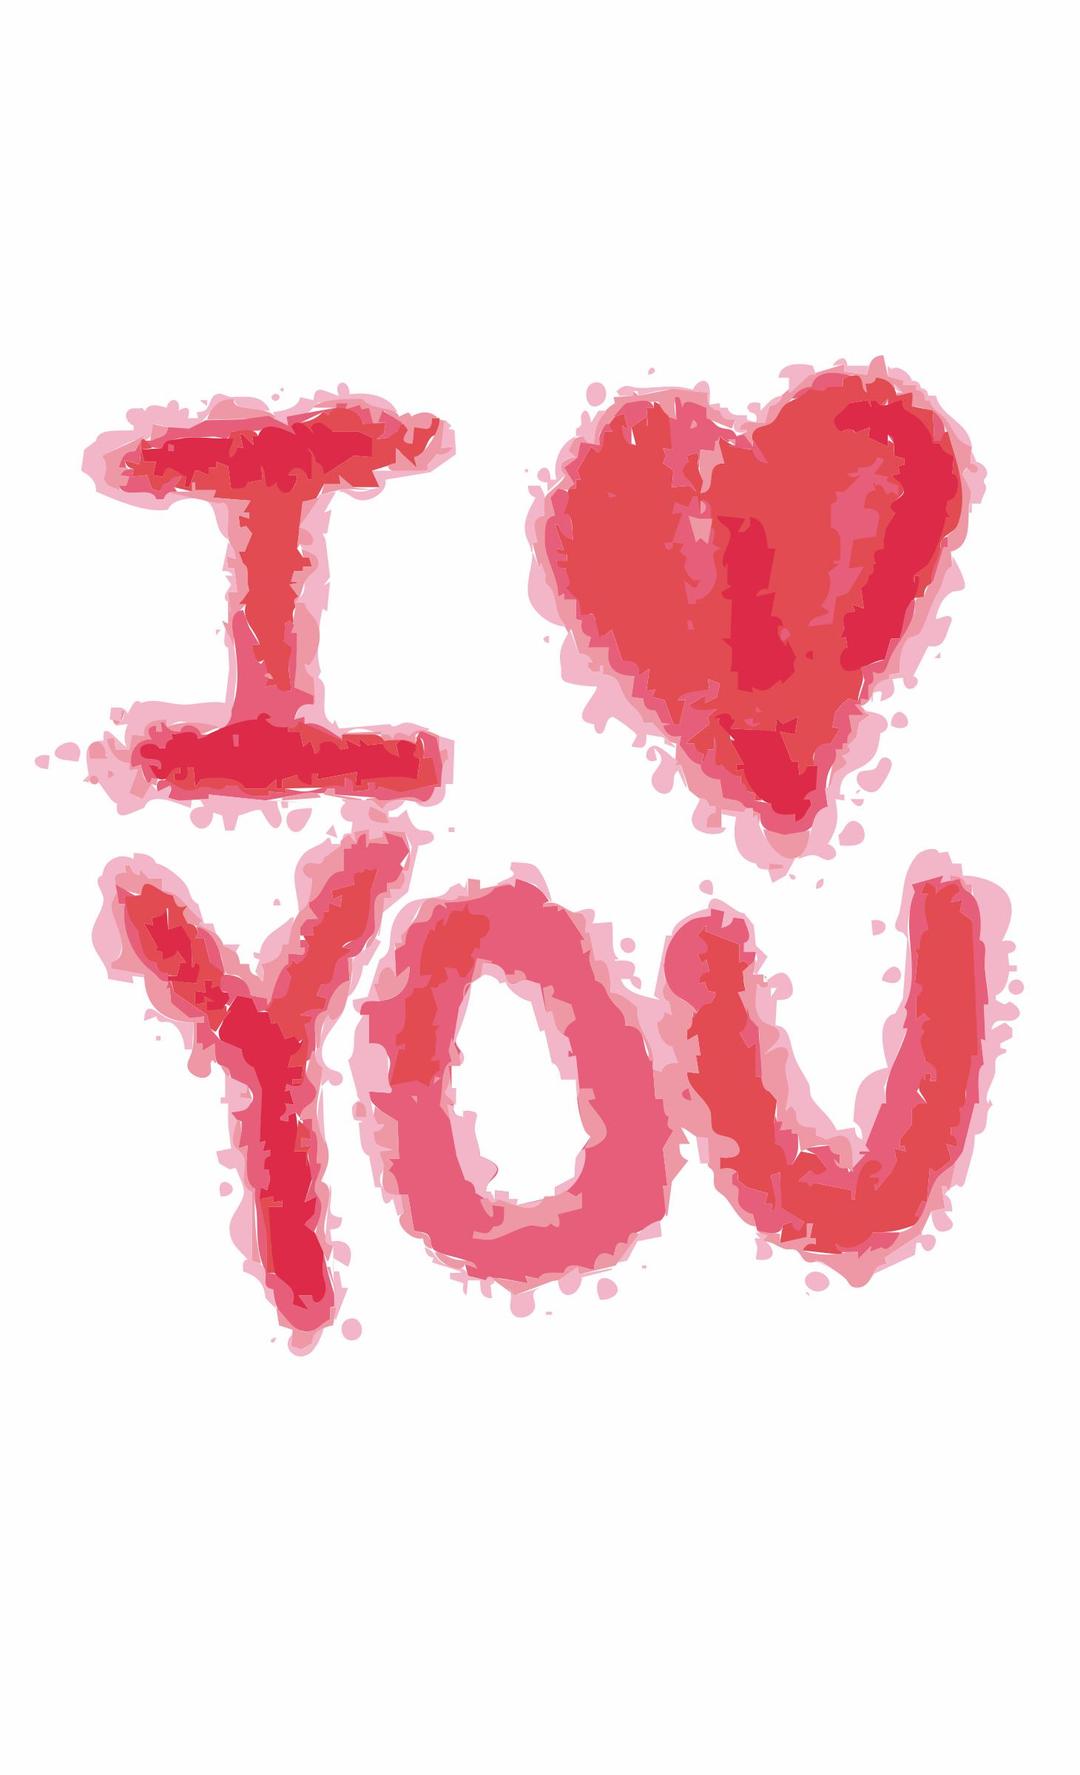 For any questions, comments, ideas or love letters: love@openclipart.org png transparent